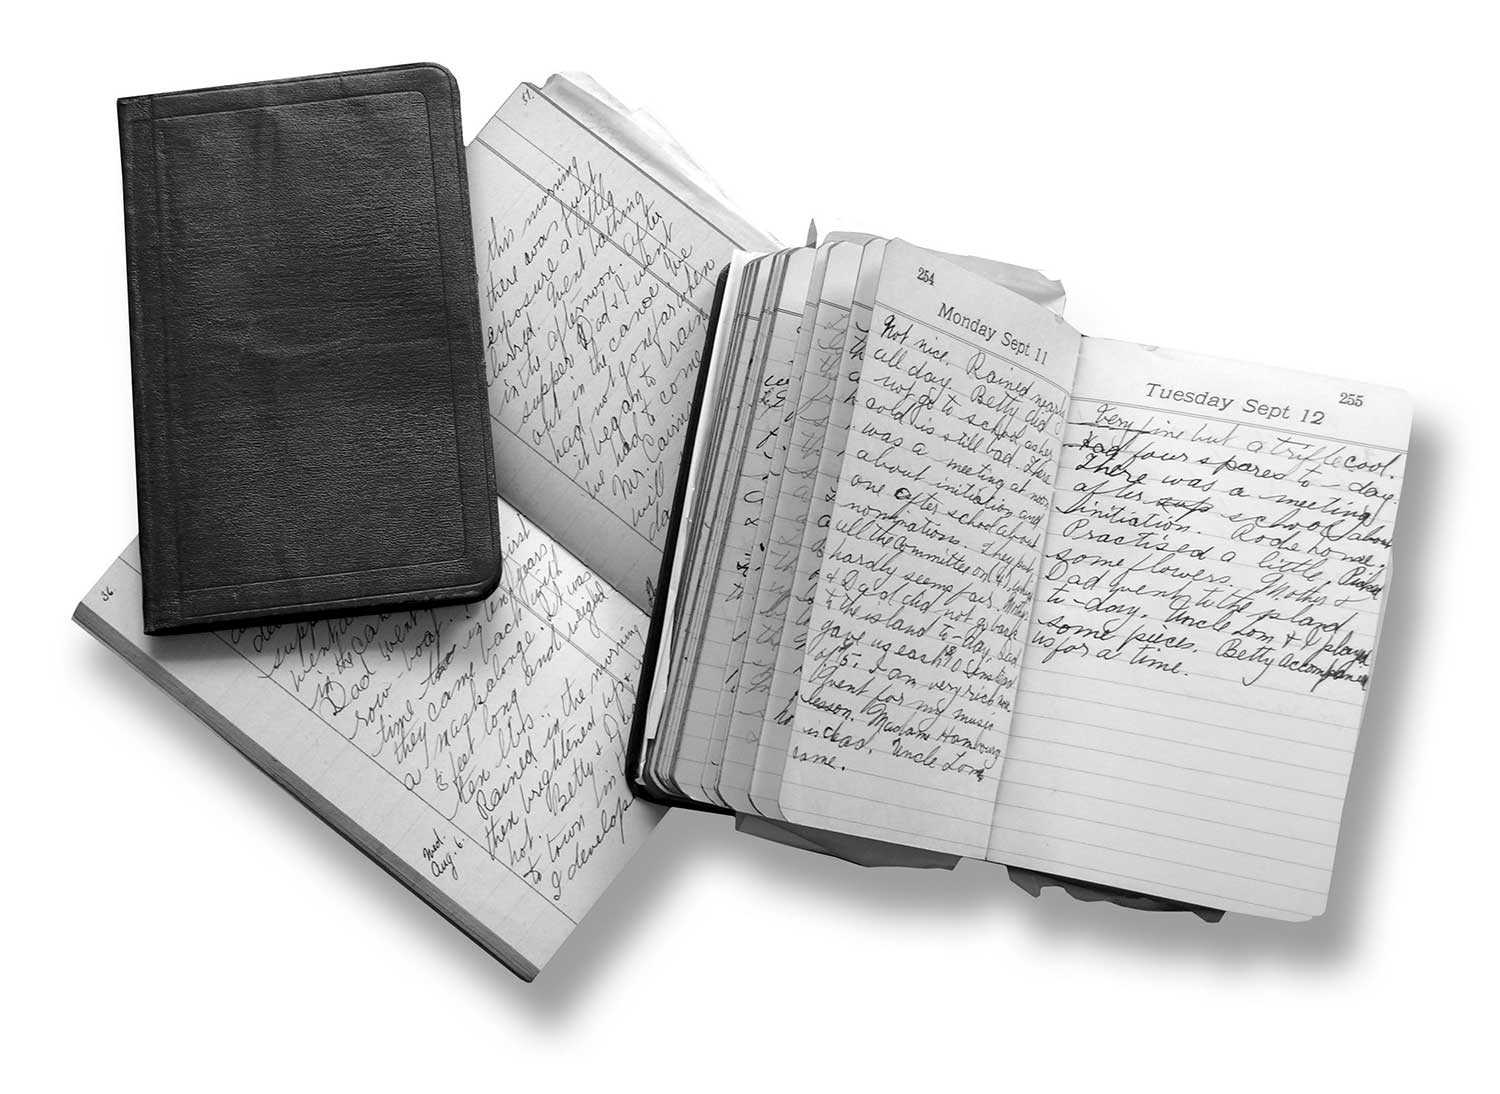 The Ashbridge collection held by the Trust includes these diaries. Artifacts like these are carefully preserved under archival conditions.